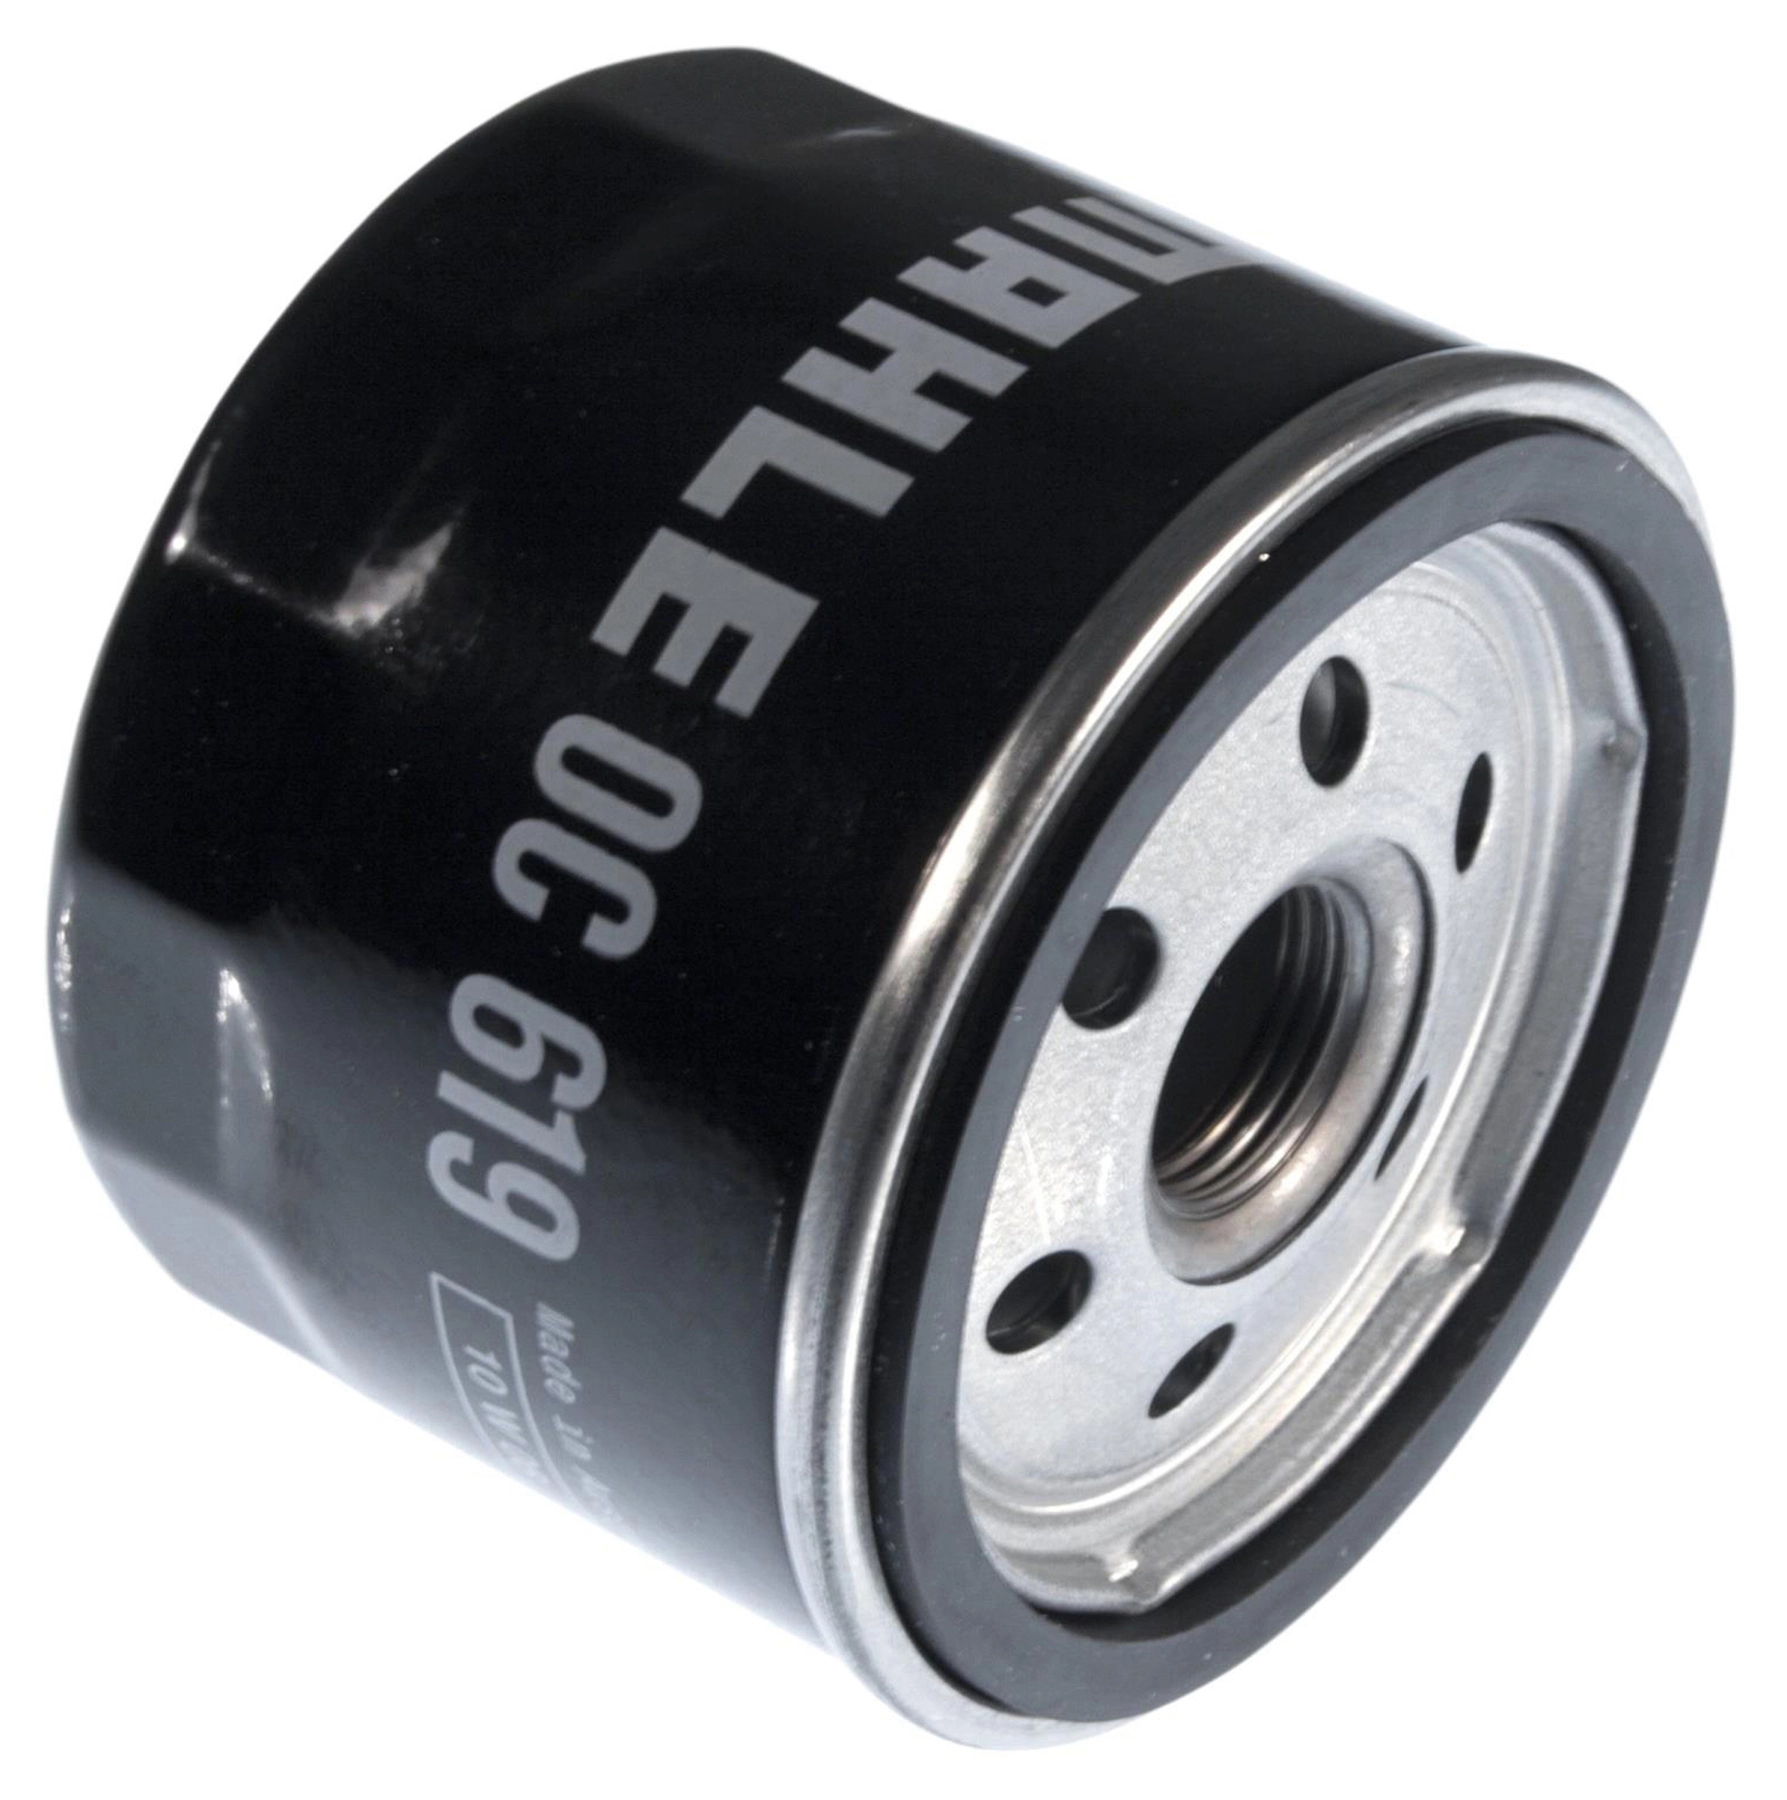 MAHLE OIL FILTER FOR BMW